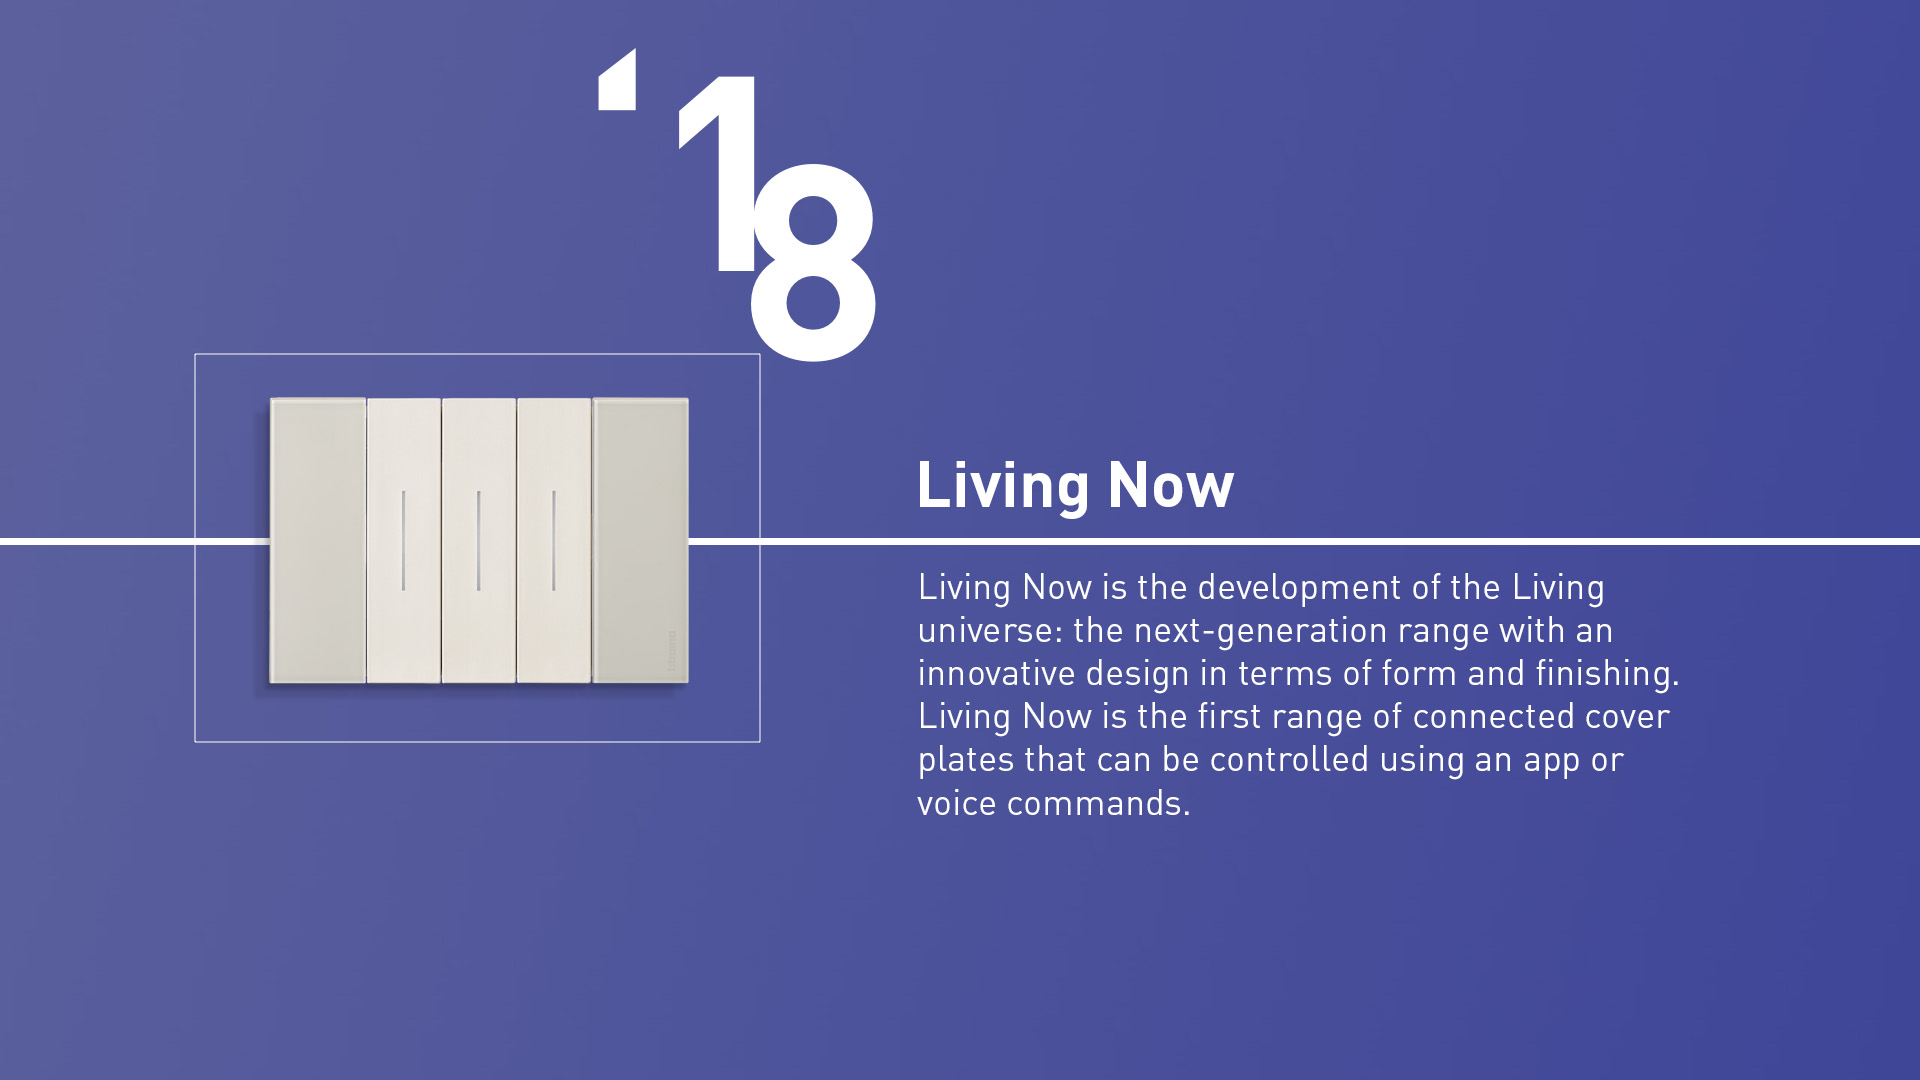 Living Now (2018). The next-generation range with an innovative design in terms of form and ﬁnishing. The first range of connected cover plates that can be controlled by app or voice.